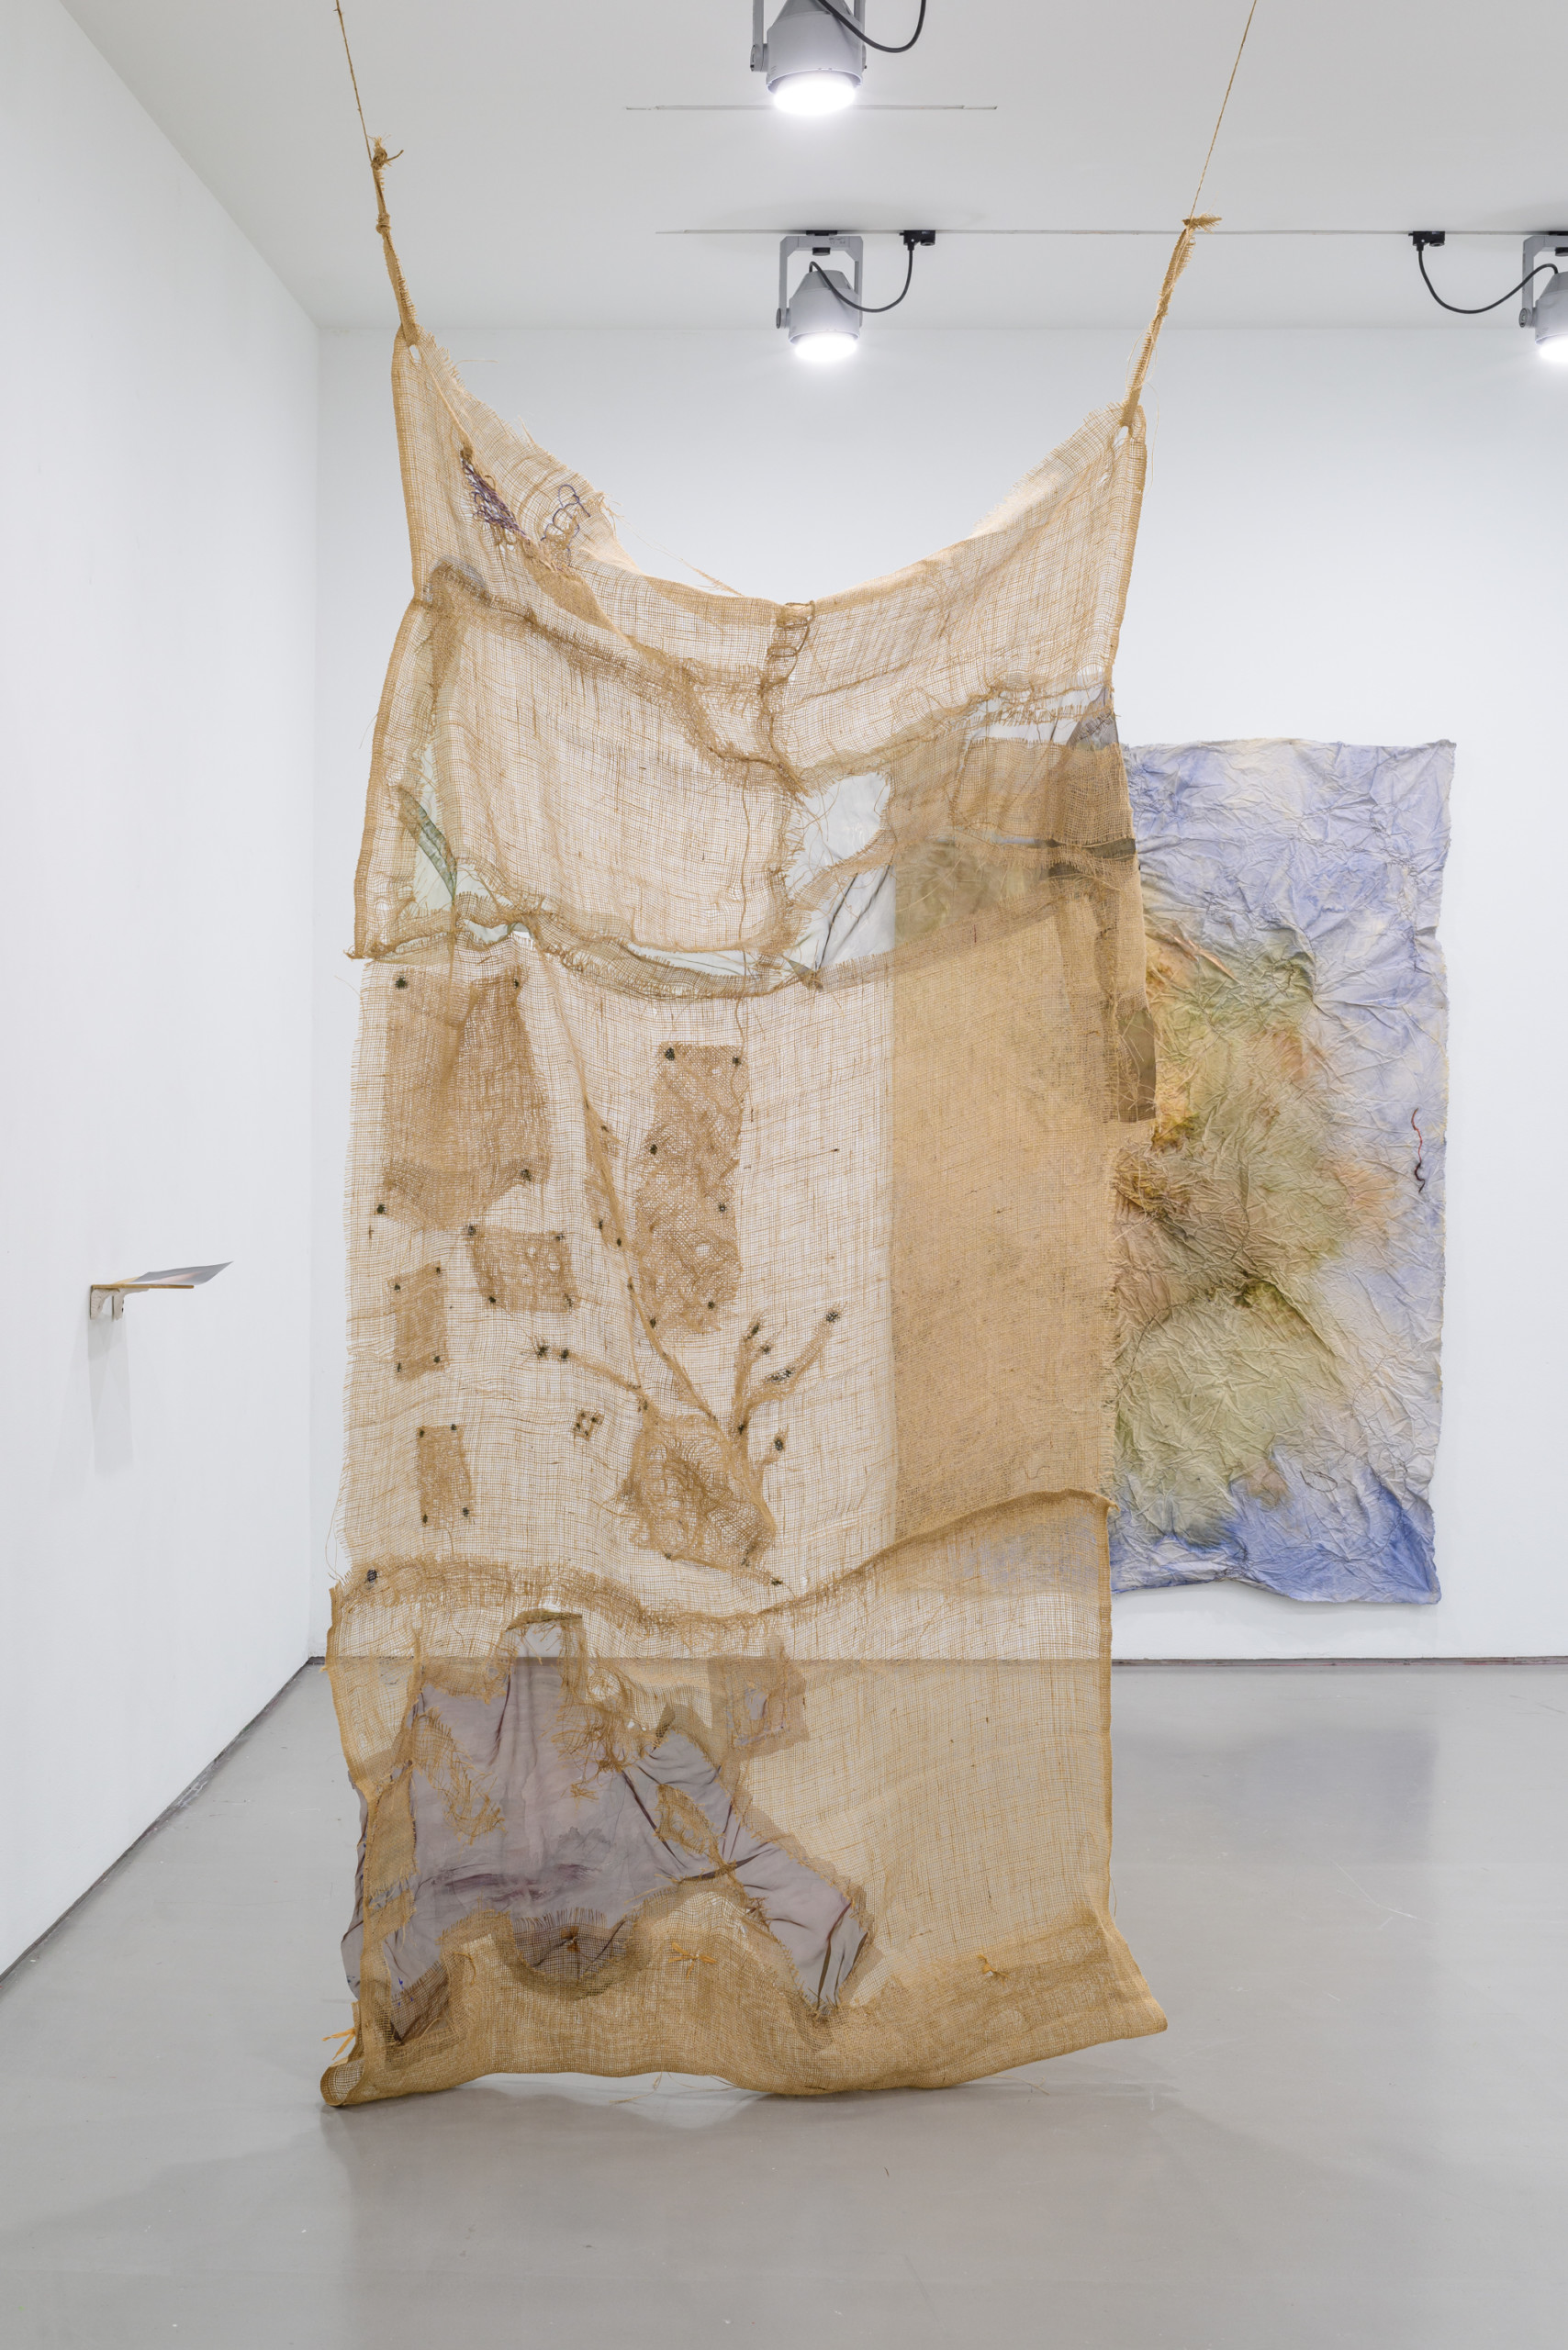 Jaana Laakkonen’s installation displayed in a gallery space with white walls. The installation consists of a textile piece hanging from the ceiling. The fabric is beige in colour and see through, probably made of jute. Another work is hanging on a wall in the background. A small shelf-looking object is attached to the wall on the left.